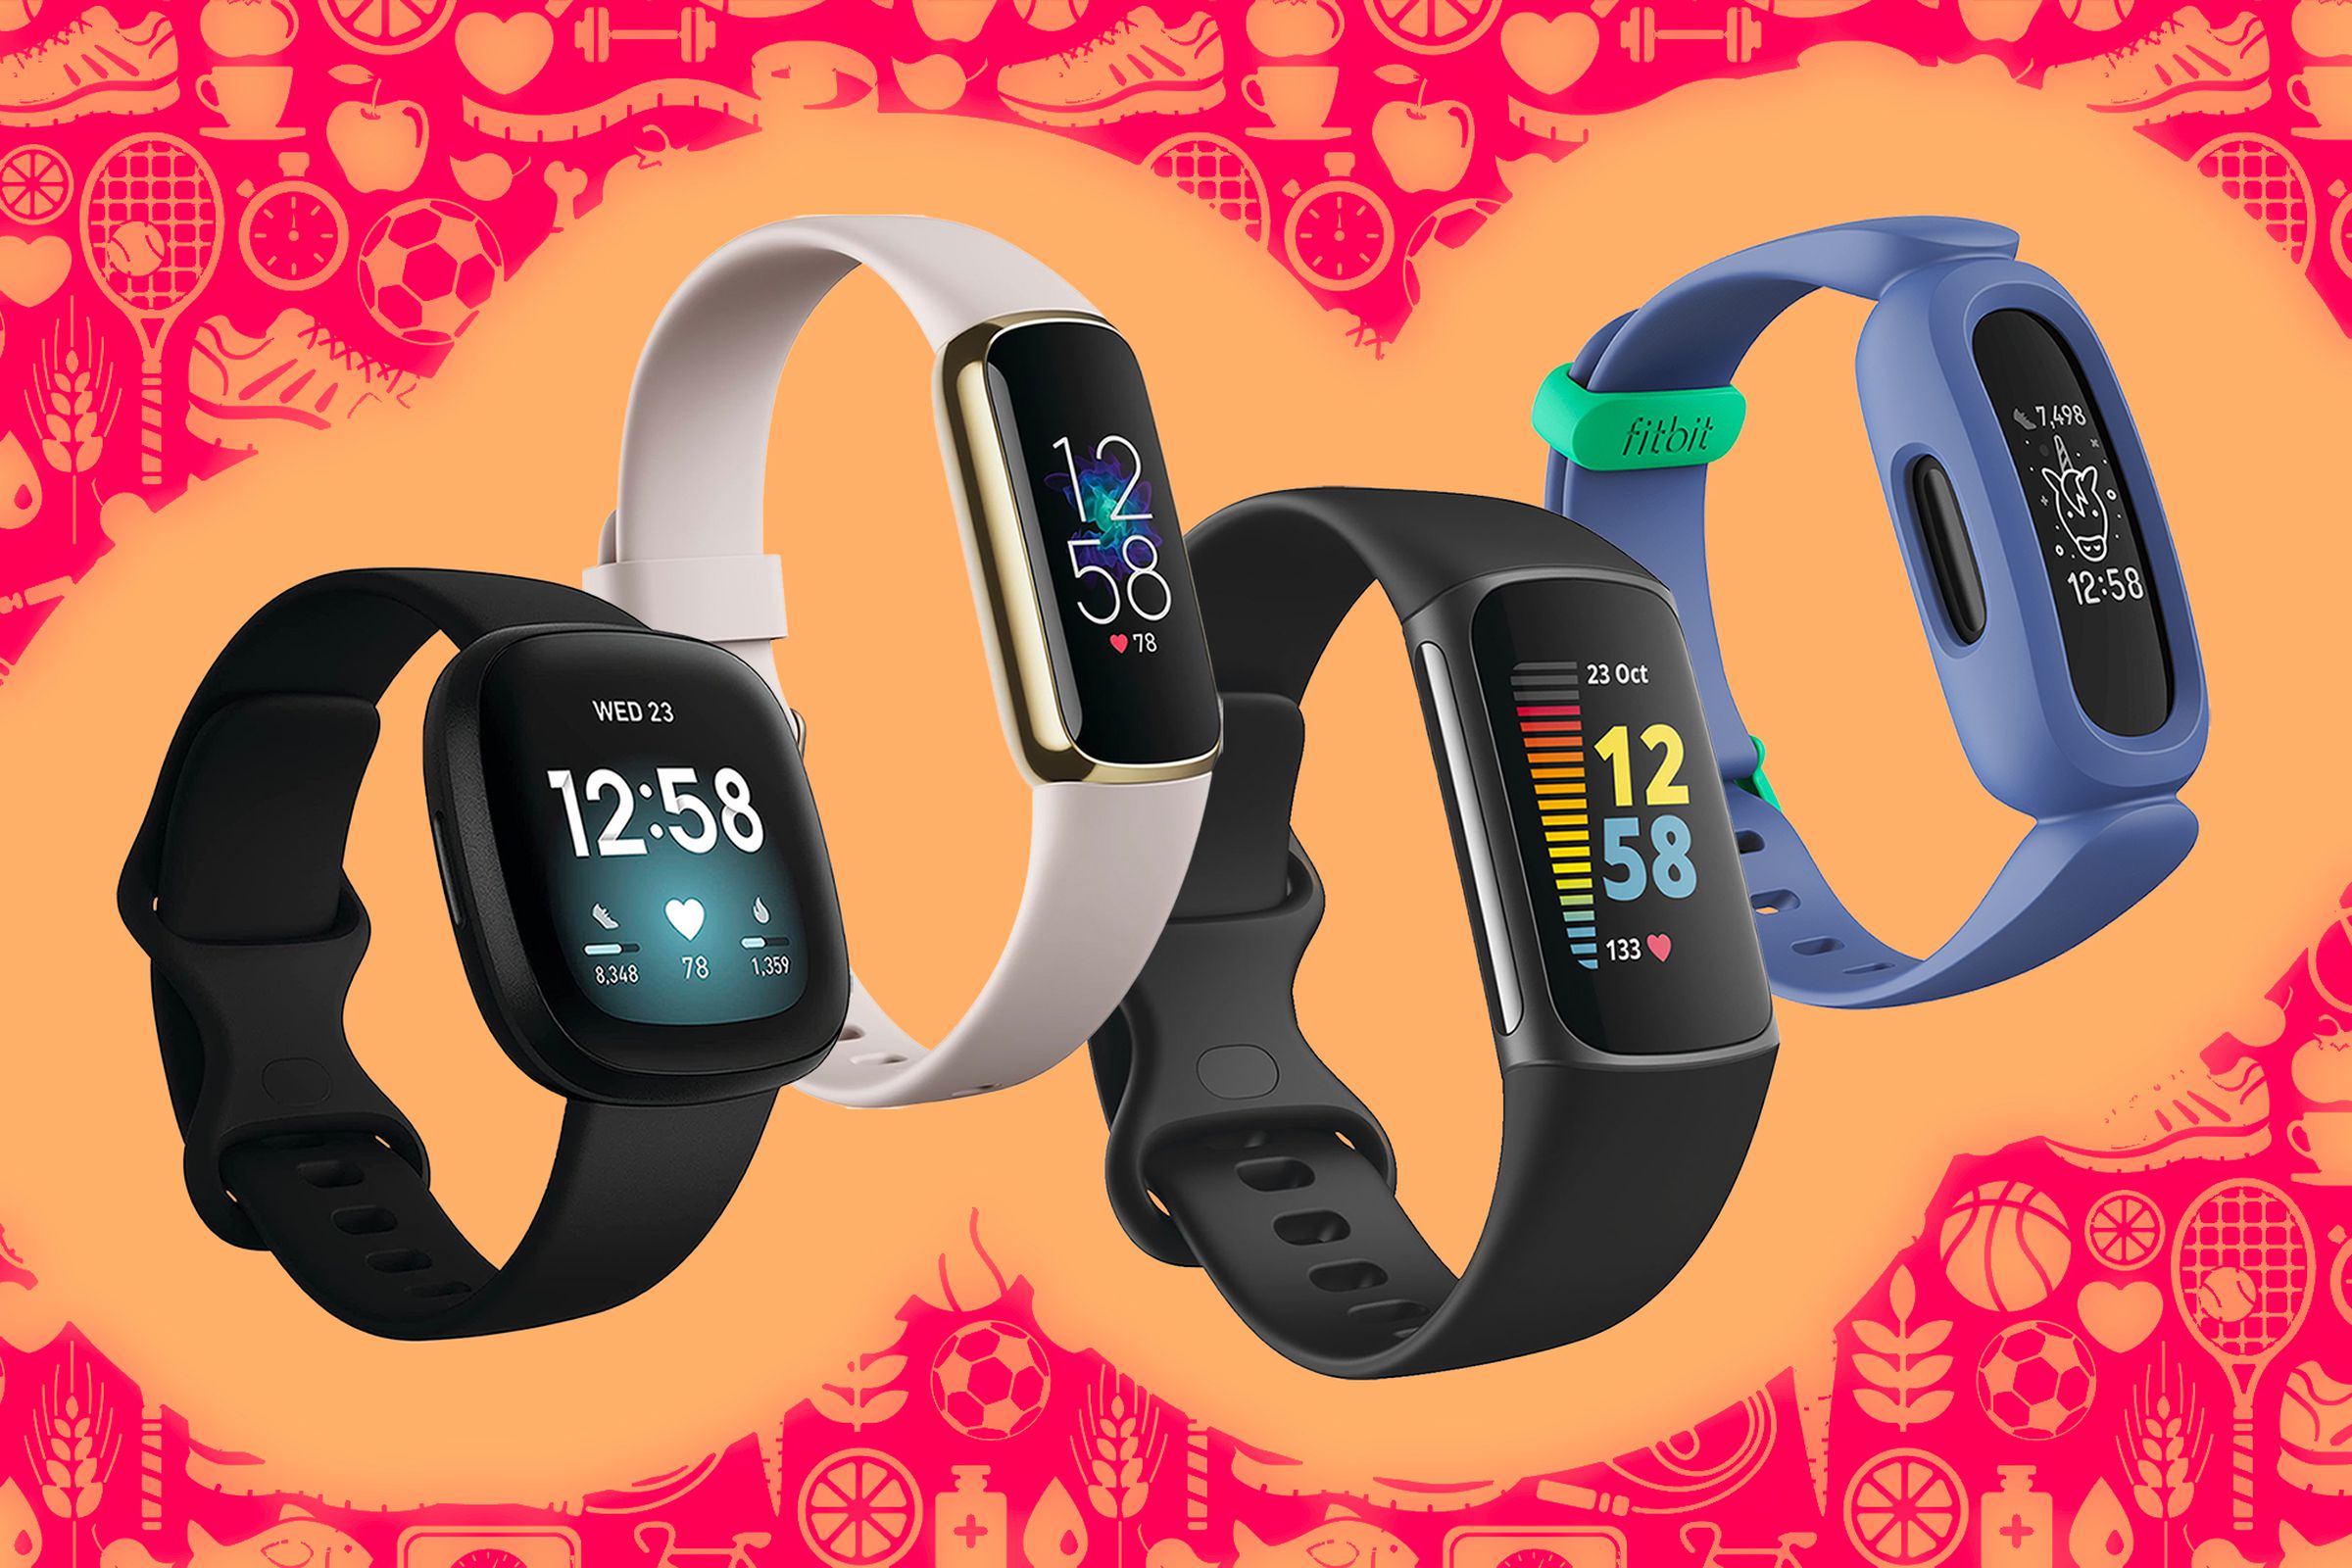 The Fitbit Versa, Fitbit Luxe, Fitbit Charge 5, and Fitbit Ace 3 fitness trackers, on an orange and red background.